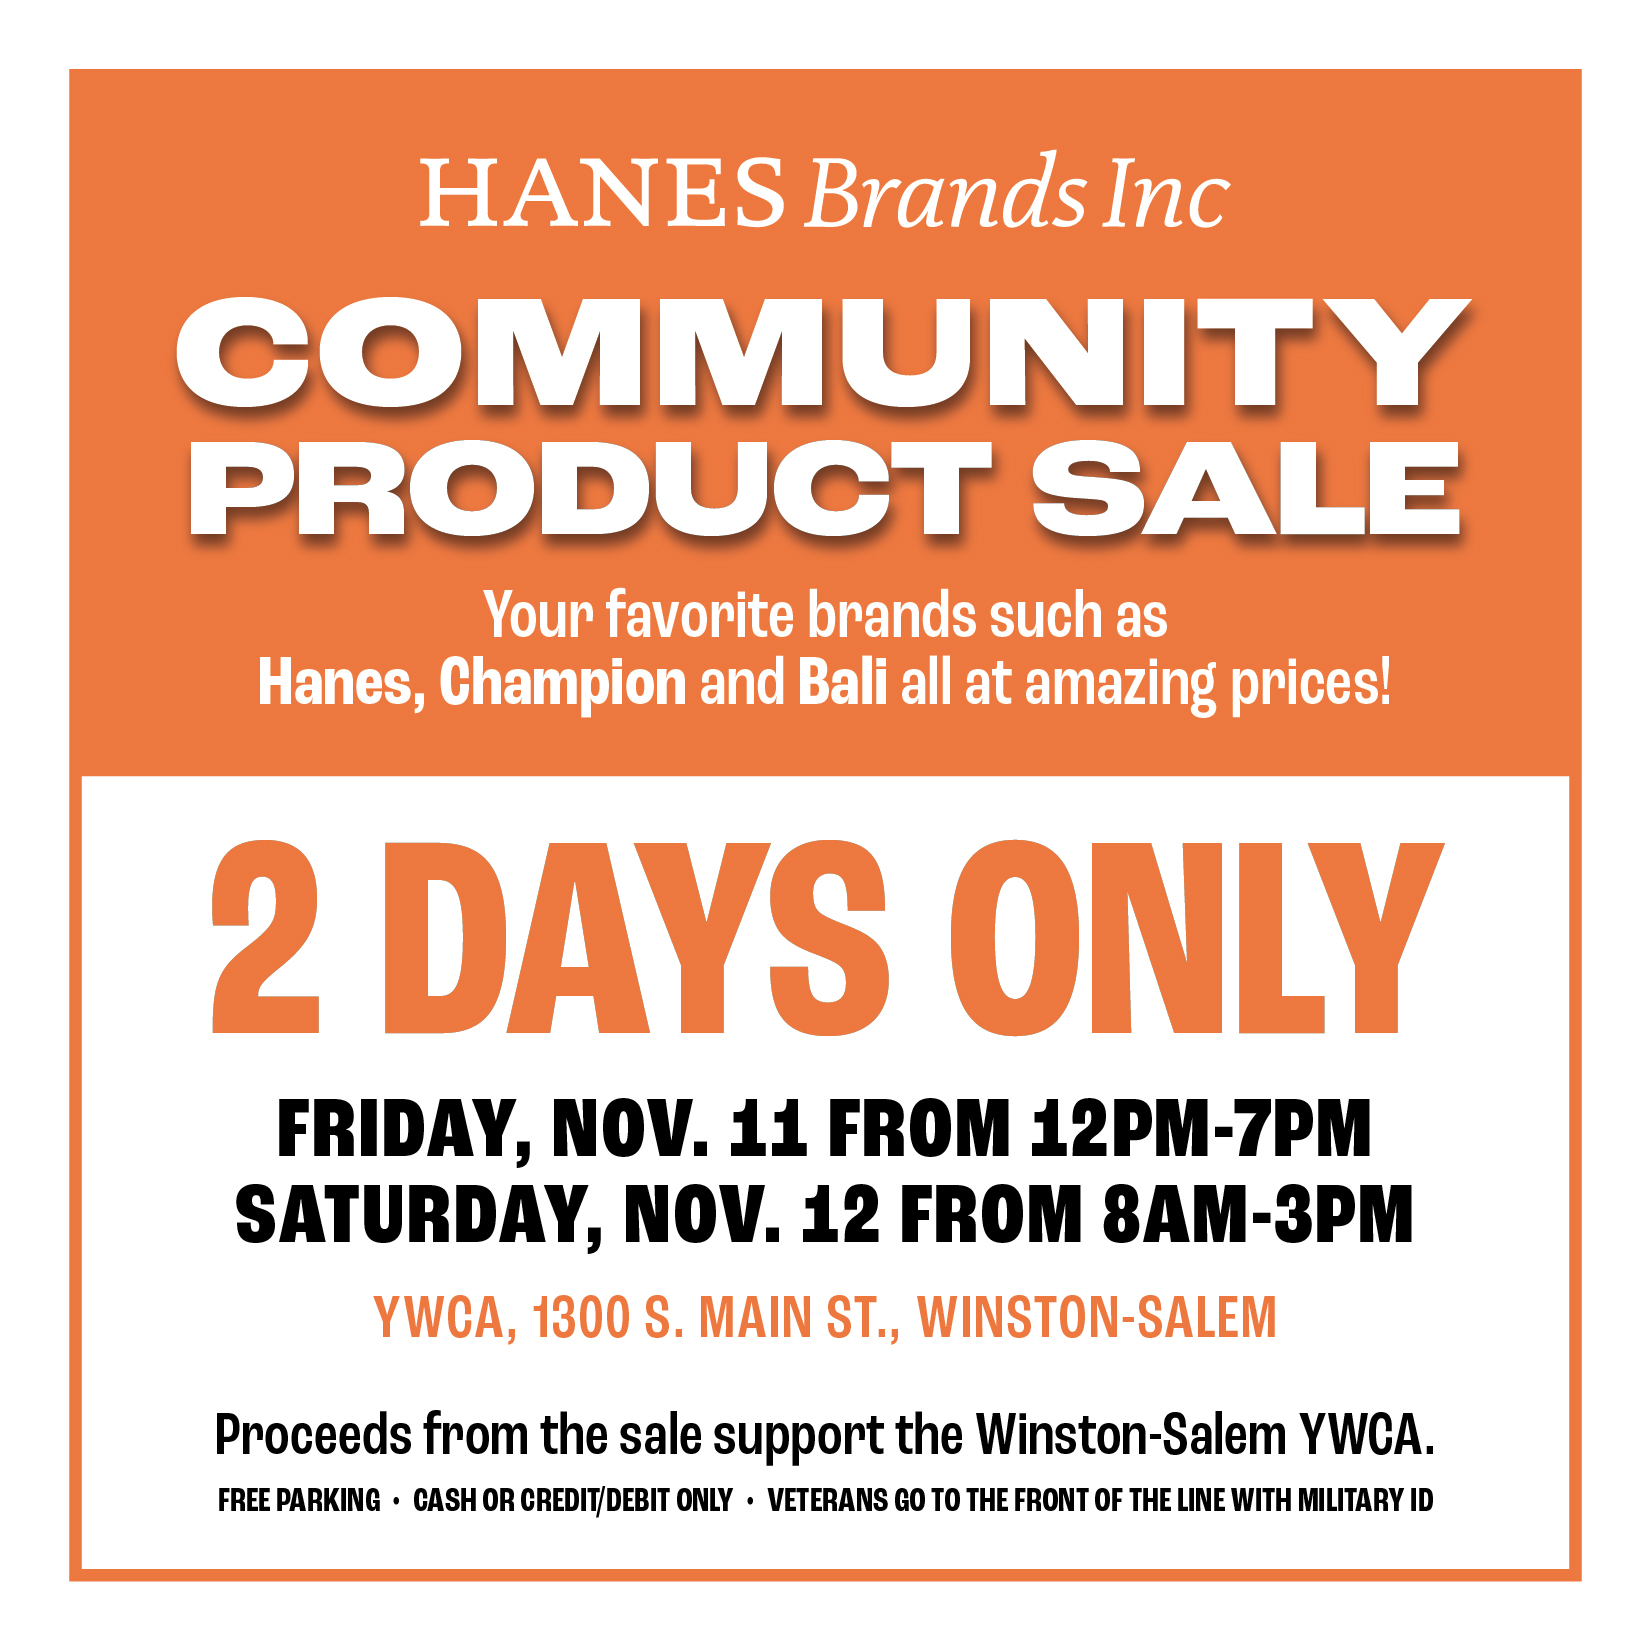 Hanes Brands Inc Community Product Sale, Your favorite brands such as Hanes, Champion and Bali all at amazing prices; 2 days only, Friday Nov. 11 from 12pm - 7pm; Sat Nov 12 from 8am - 3pm. YWCA, 1300 S. Main Street, Winston-Salem. Proceeds from the sale support the Winston-Salem YWCA. Free Parking, Cash or Credit/debit only; veterans go to the front of the line with military ID